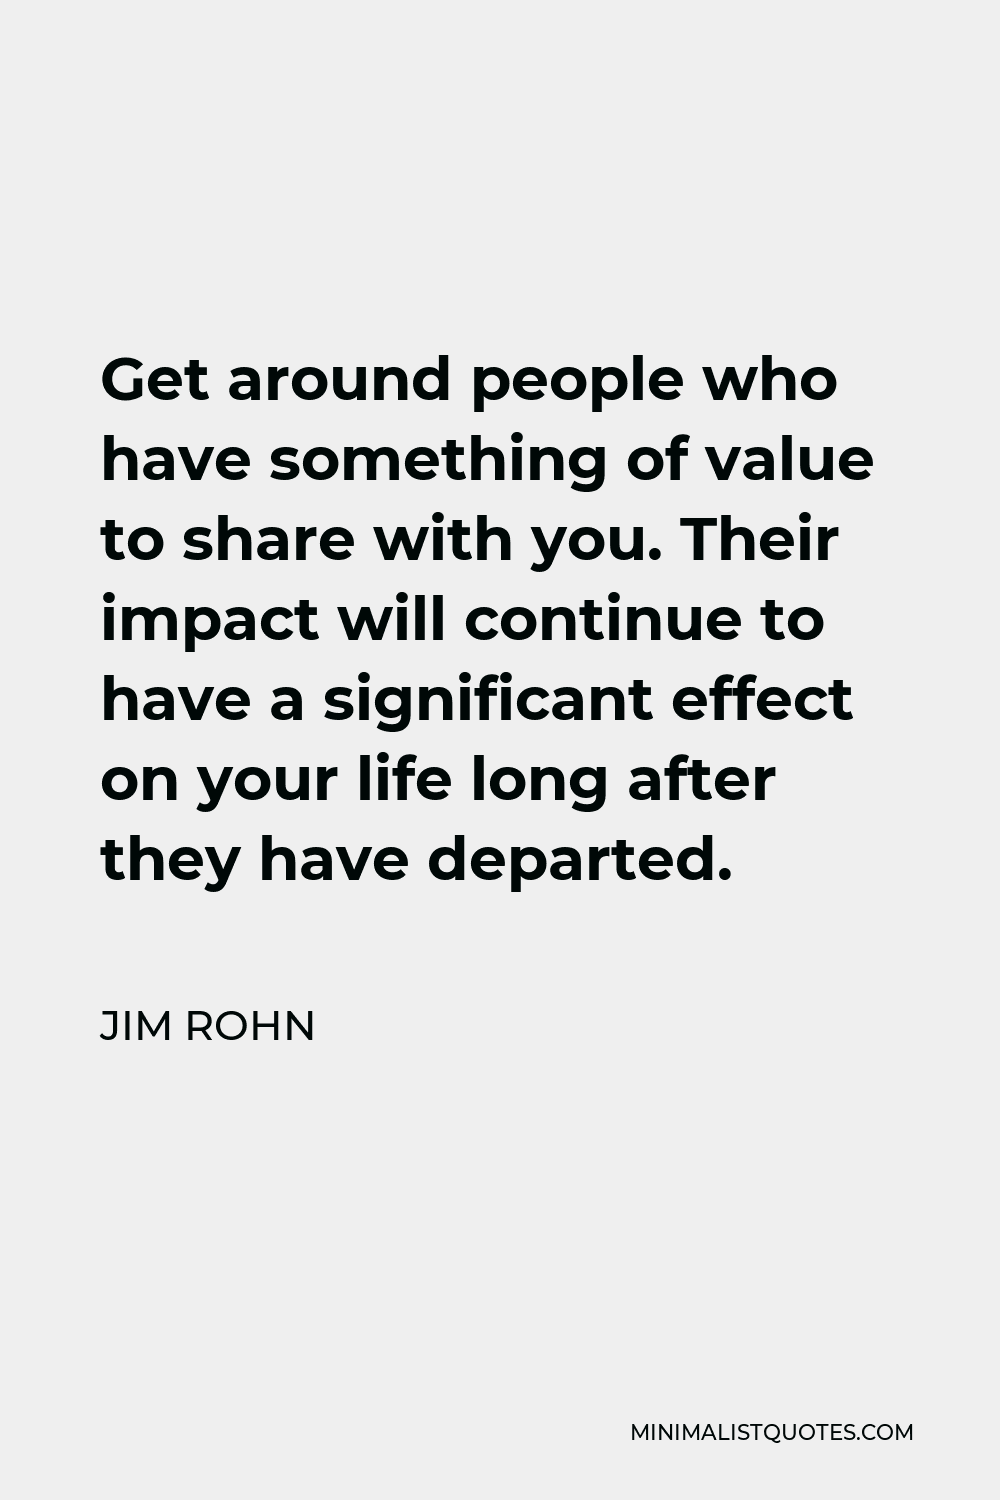 Jim Rohn Quote - Get around people who have something of value to share with you. Their impact will continue to have a significant effect on your life long after they have departed.